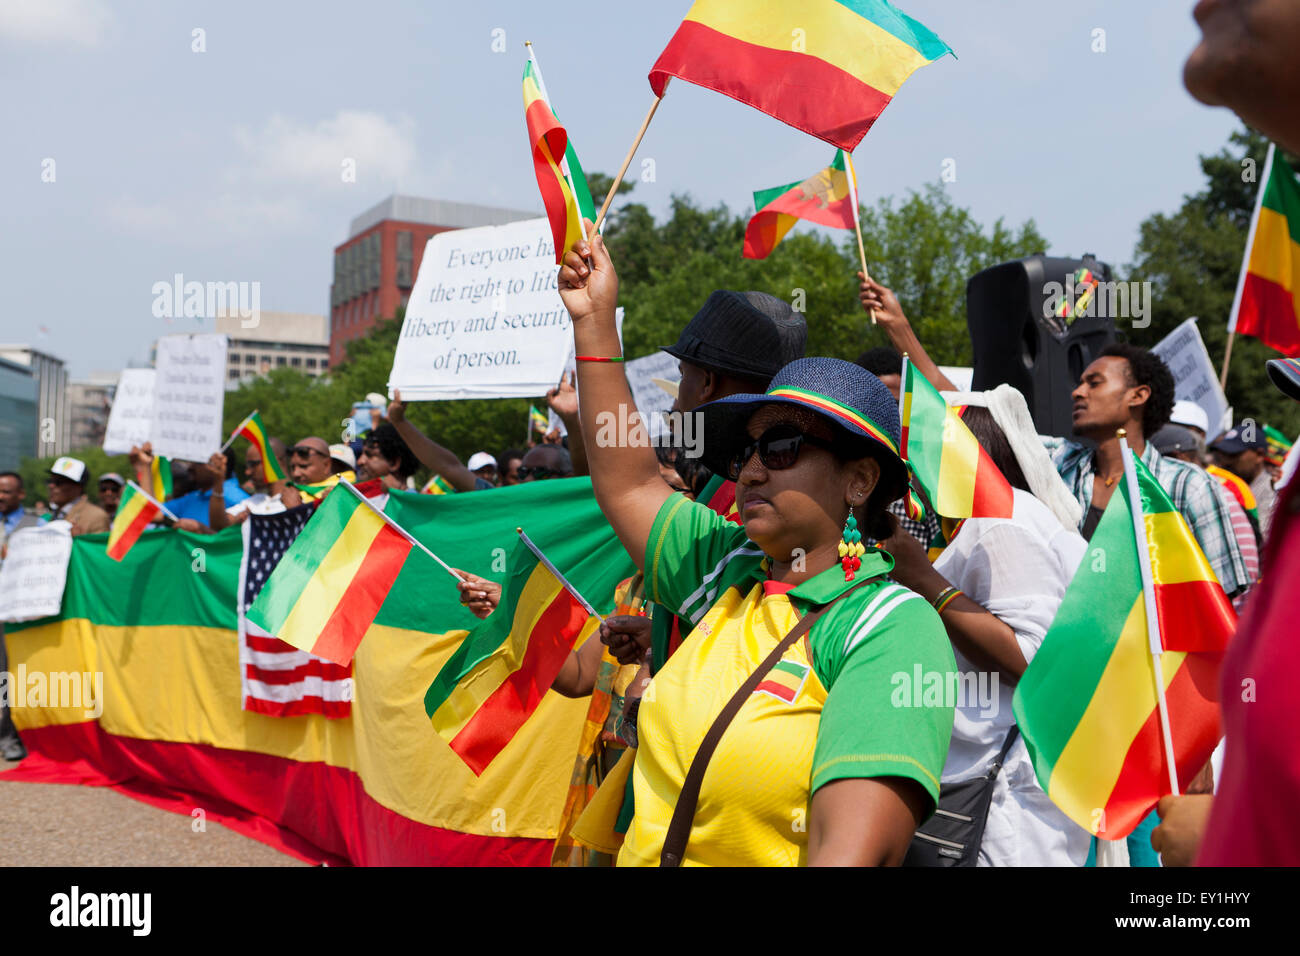 Ethiopian Americans protest outside of the White House against president Obama's planned official visit to Ethiopia Stock Photo